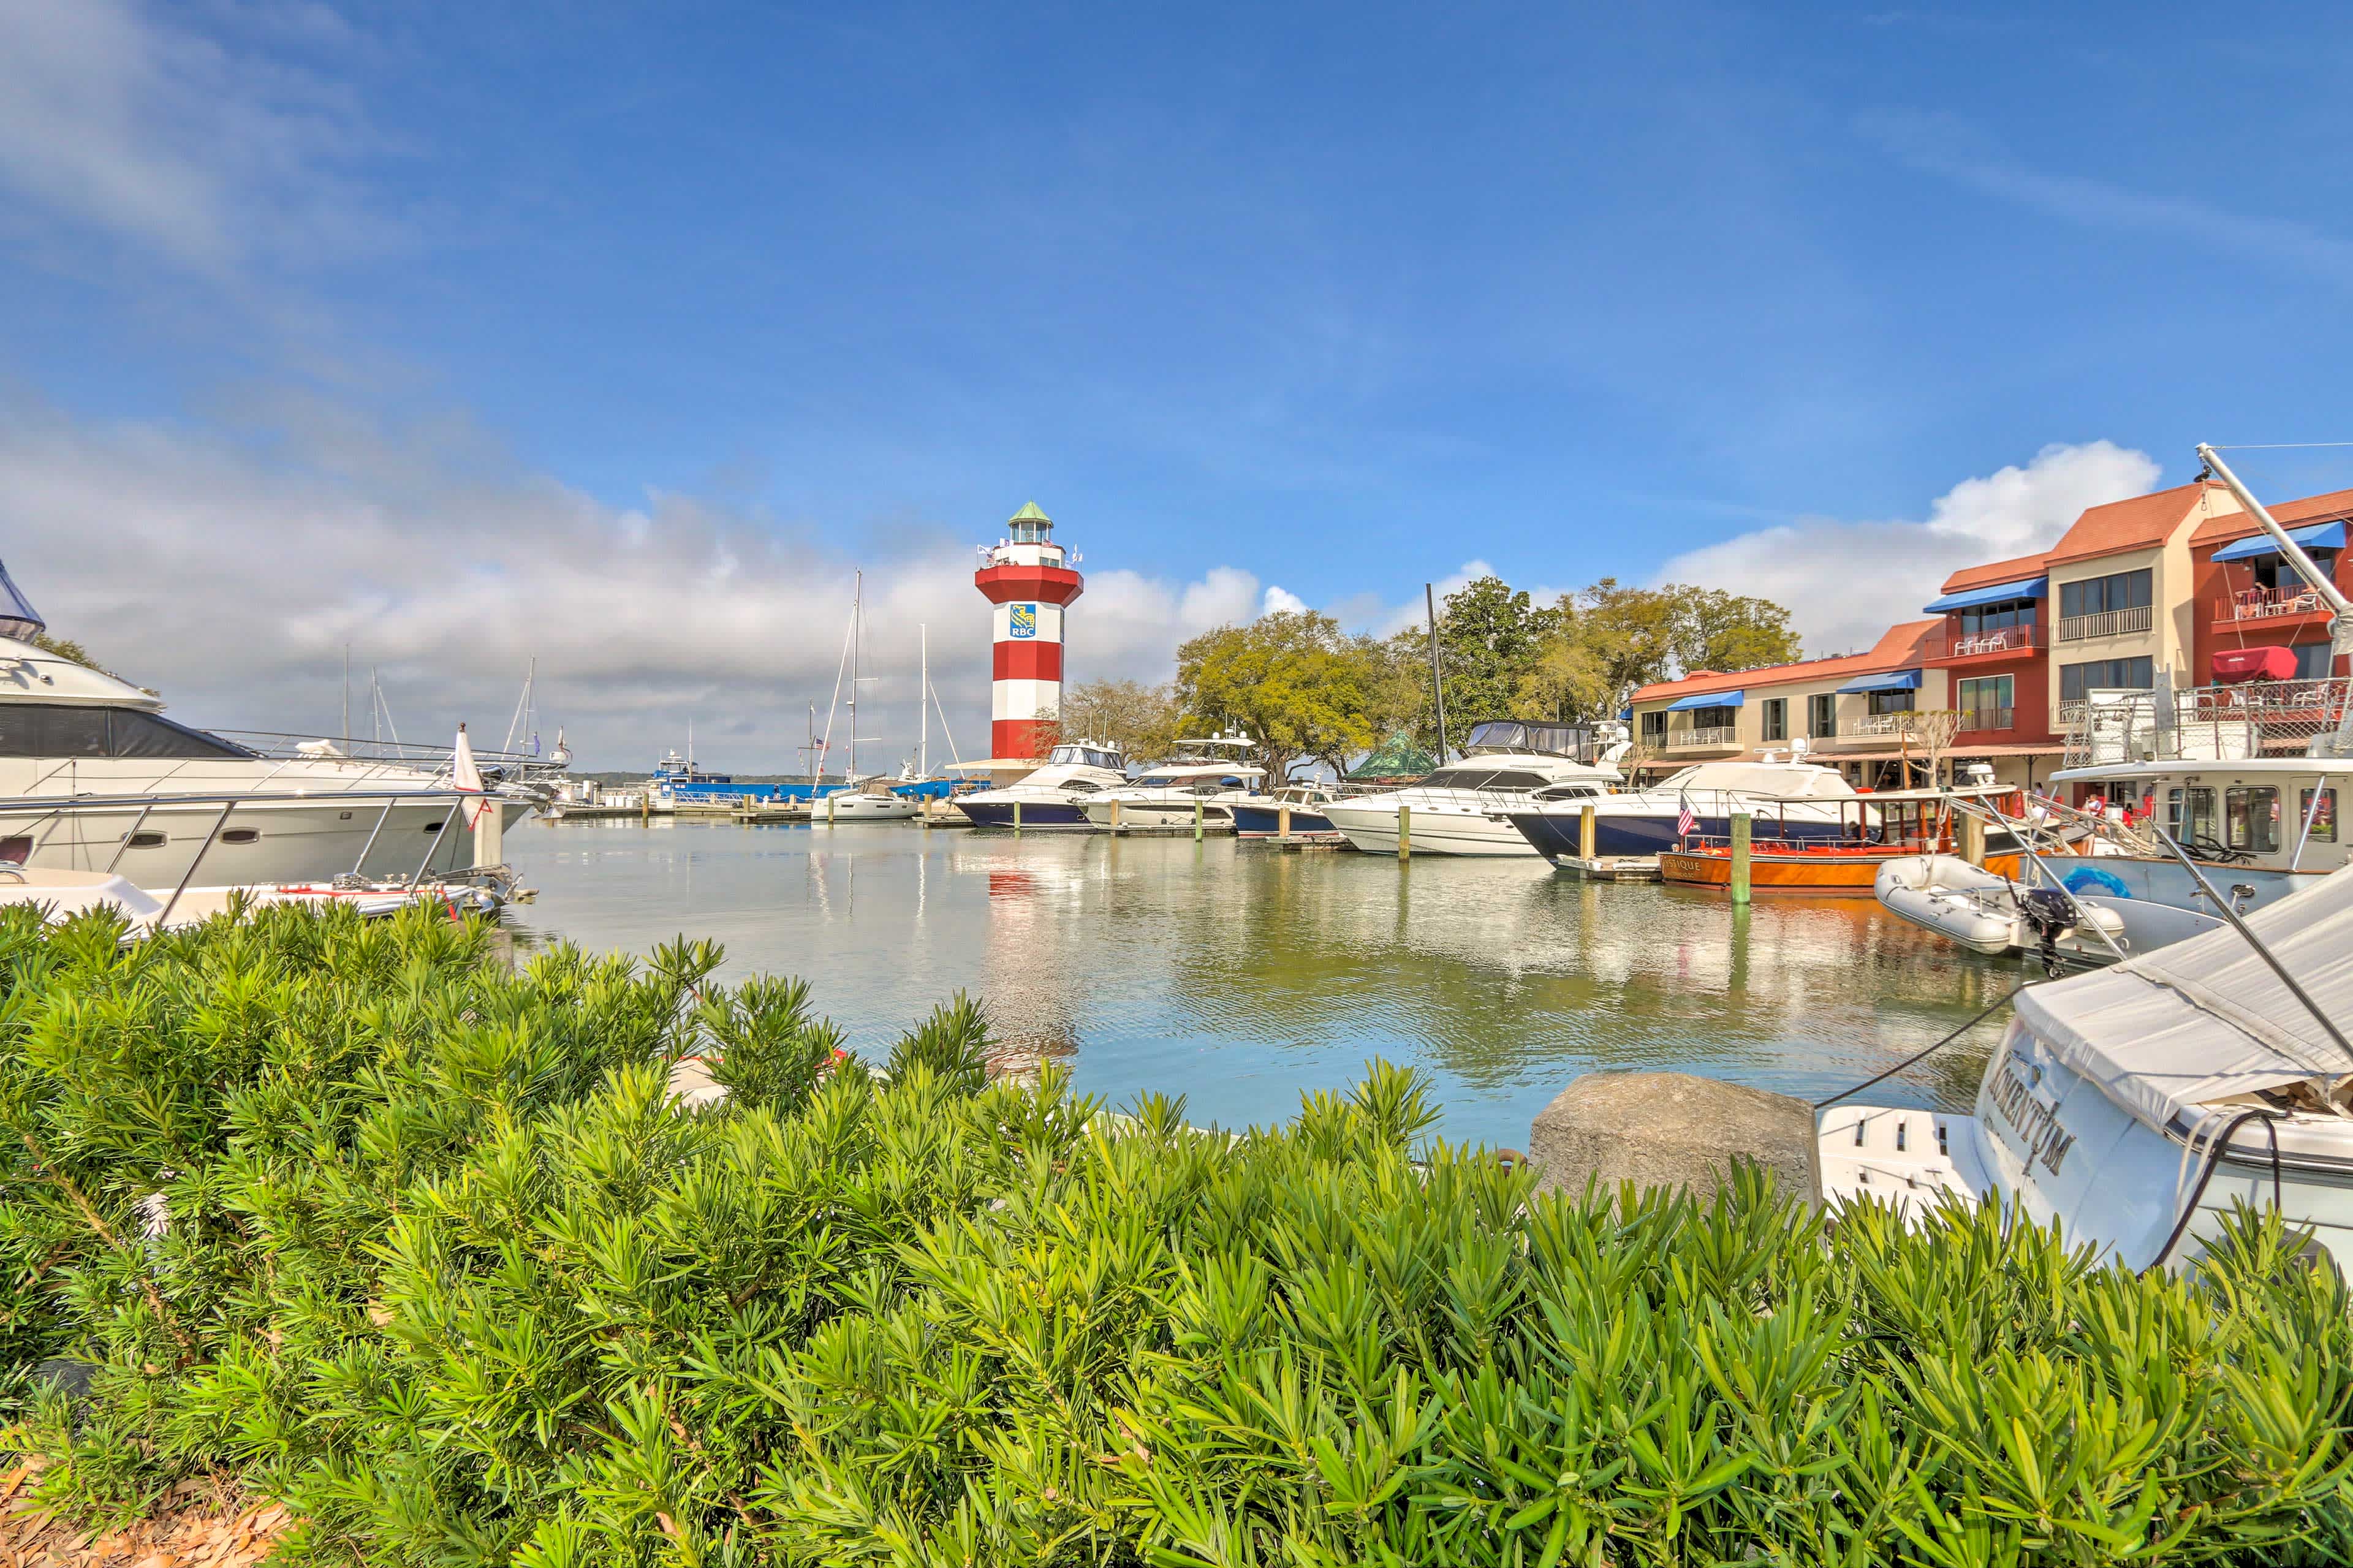 Canal in Hilton Head Island, SC with greenery in the foreground, and boats in the canal with a lighthouse in the background and blue sky overhead